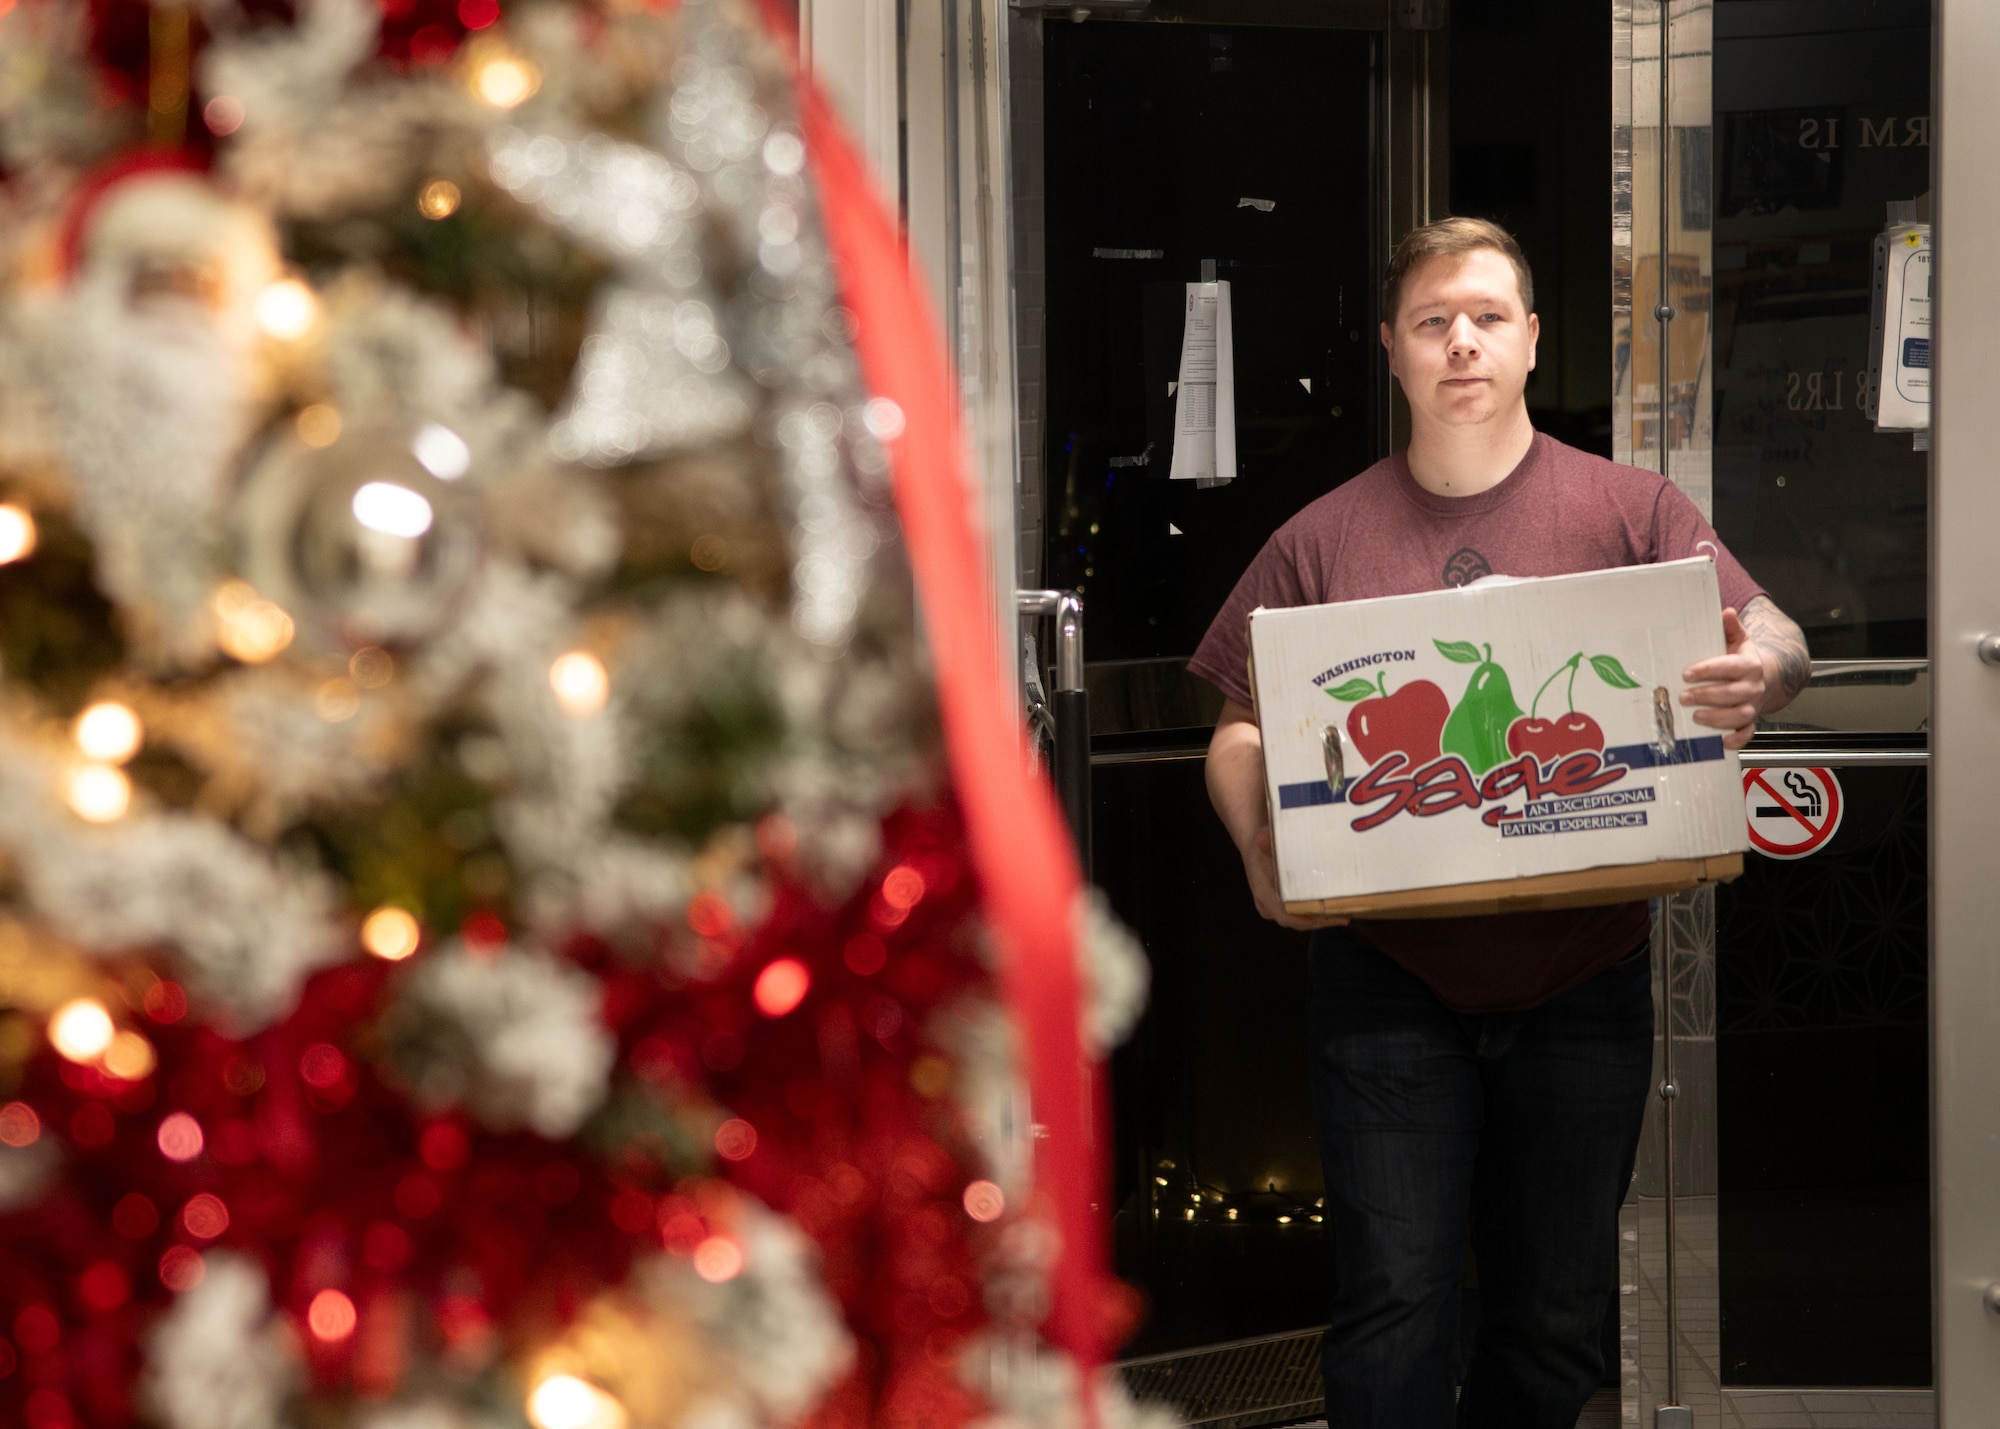 A man carrying a box of gifts walks into a building.